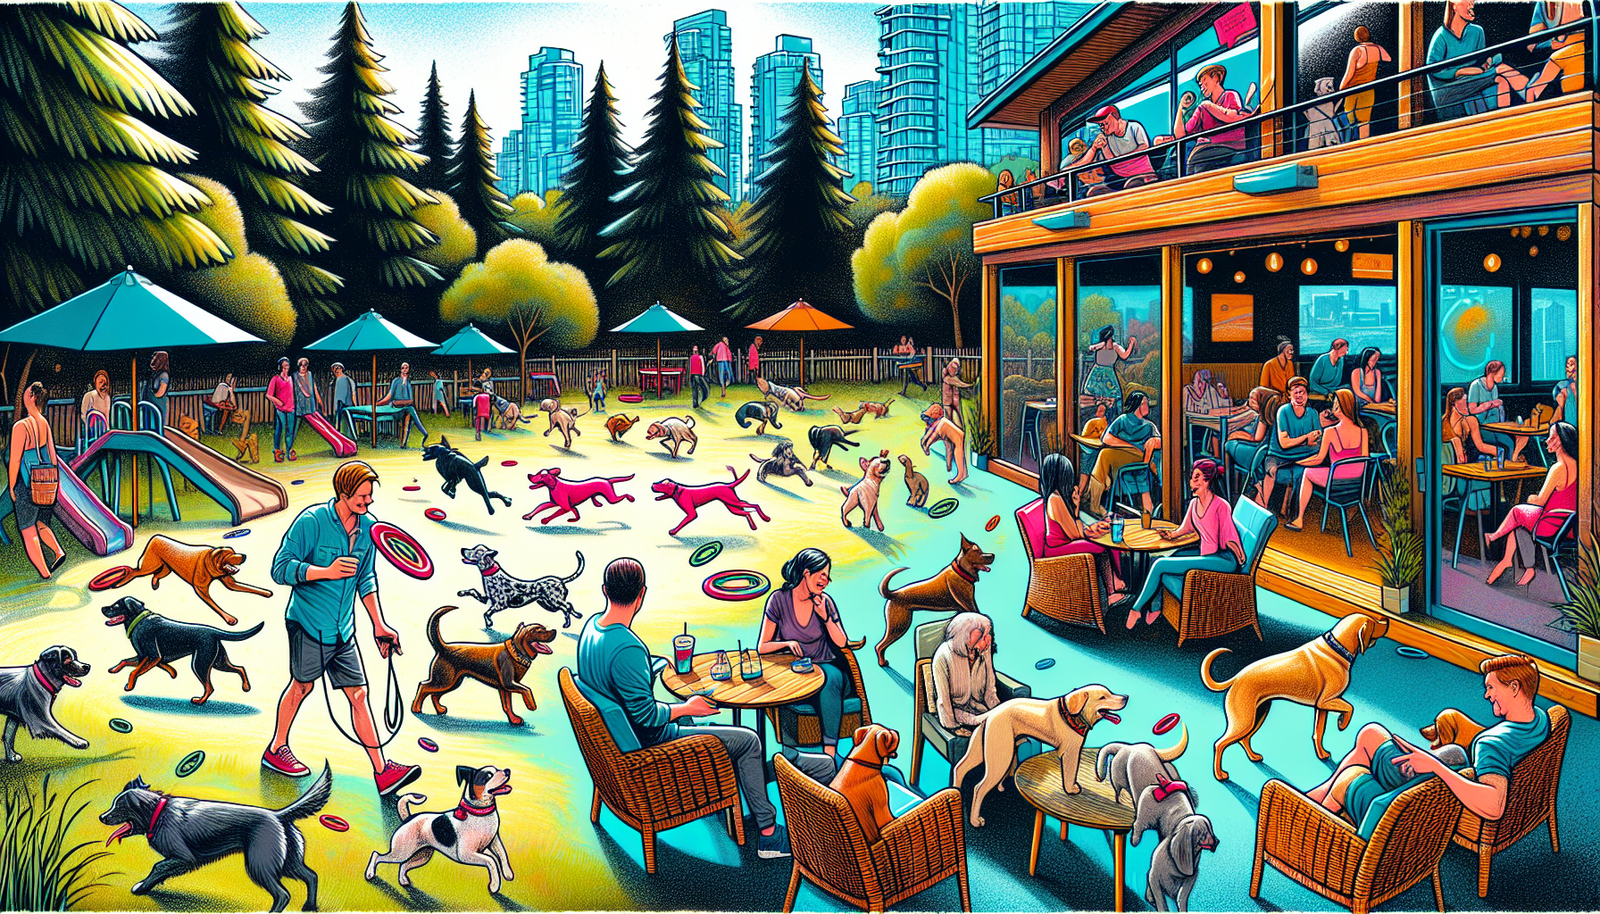 Off-leash dog park with adjacent patio in Vancouver